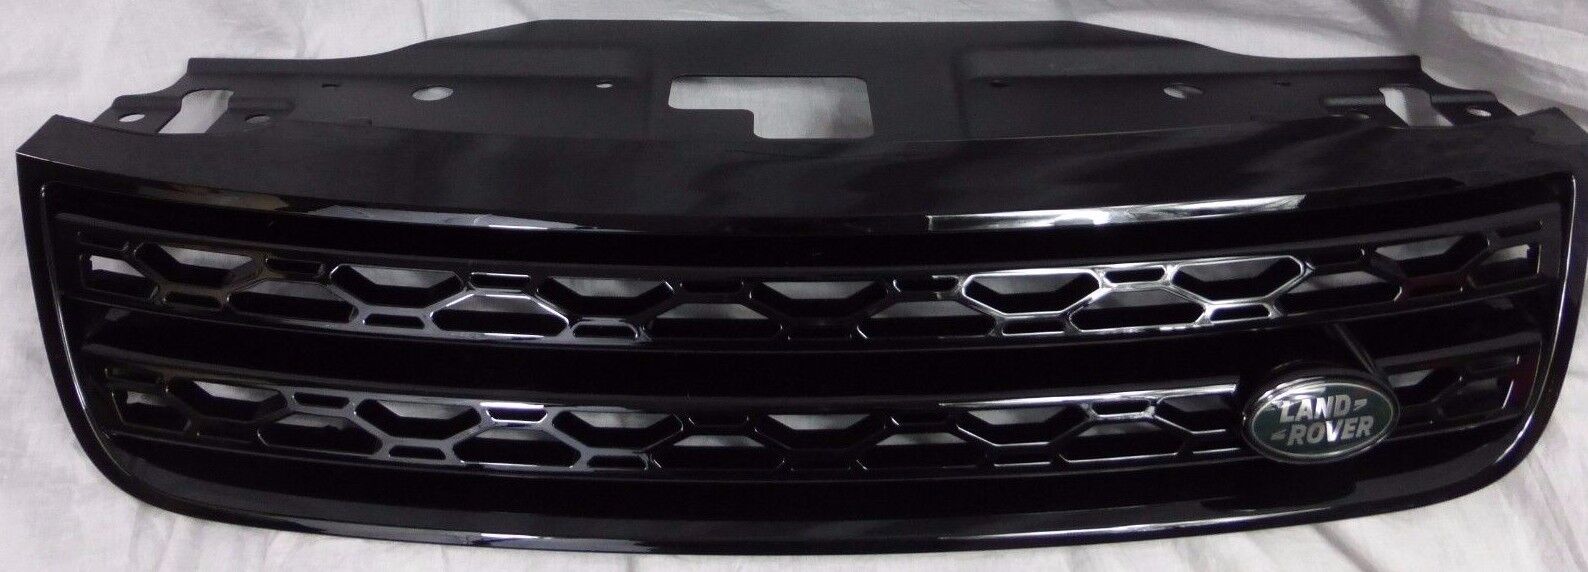 Land Rover OEM All New Discovery L462 2017-21 Gloss Black Front Grille Brand New